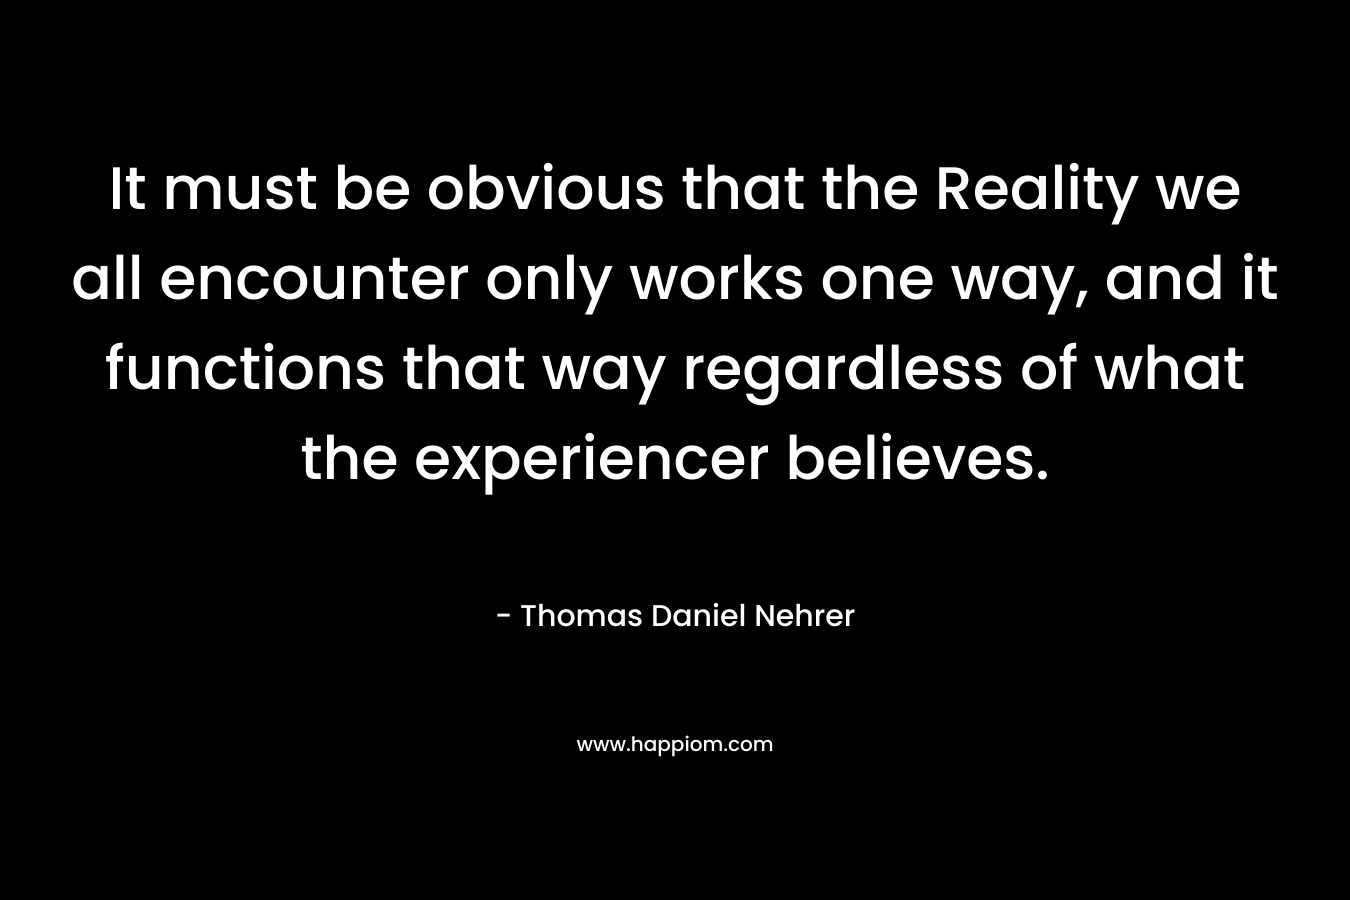 It must be obvious that the Reality we all encounter only works one way, and it functions that way regardless of what the experiencer believes. – Thomas Daniel Nehrer